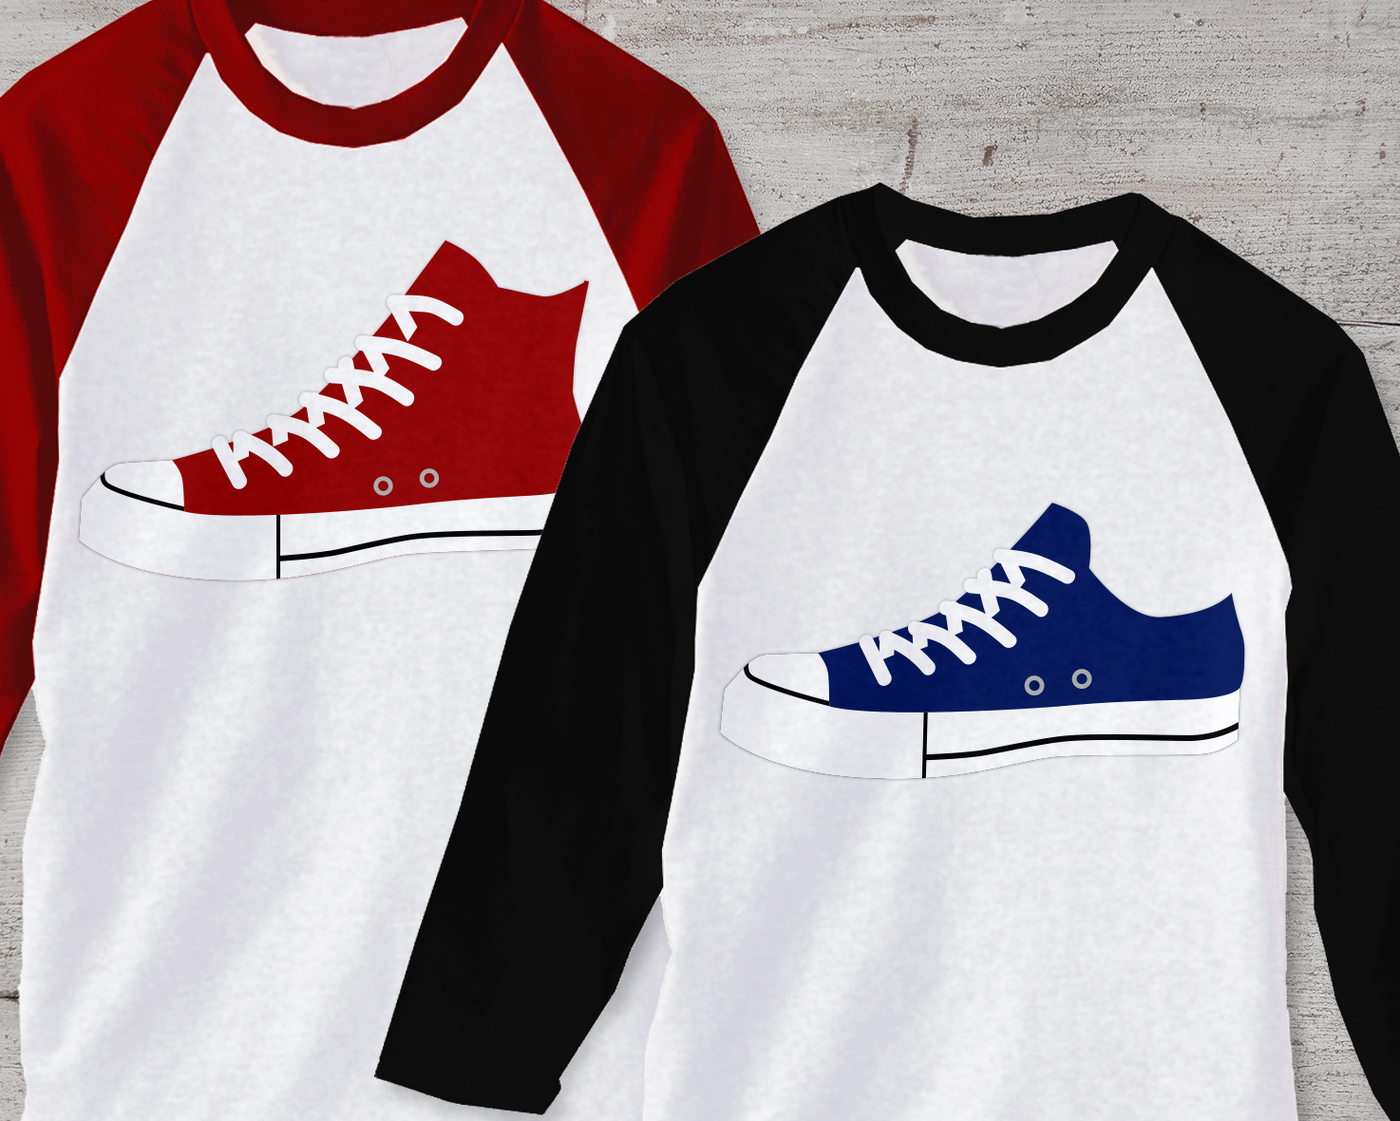 Two raglan tees, each with a Converse style sneaker design. The left is a red high top, the right is a blue low top.